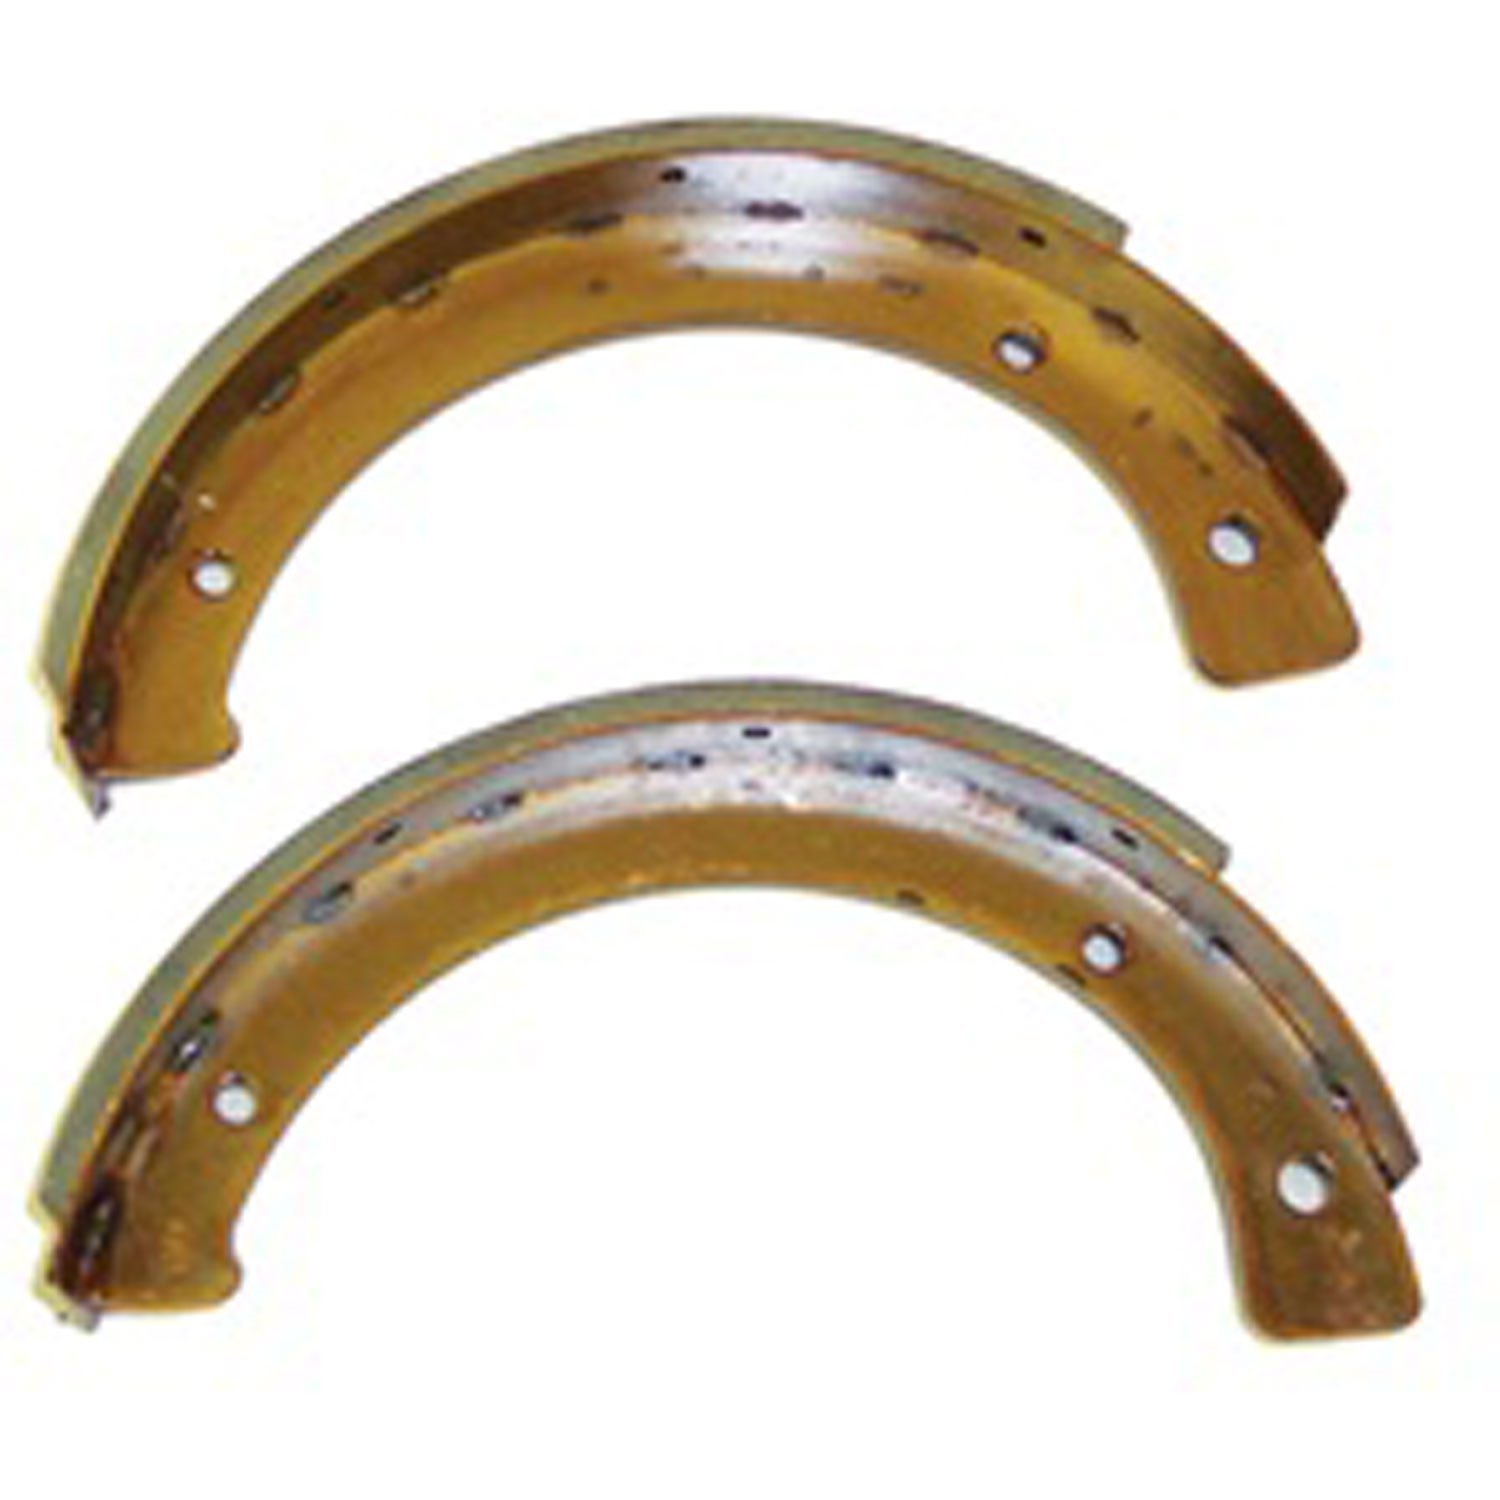 This pair of original-style emergency brake shoes from